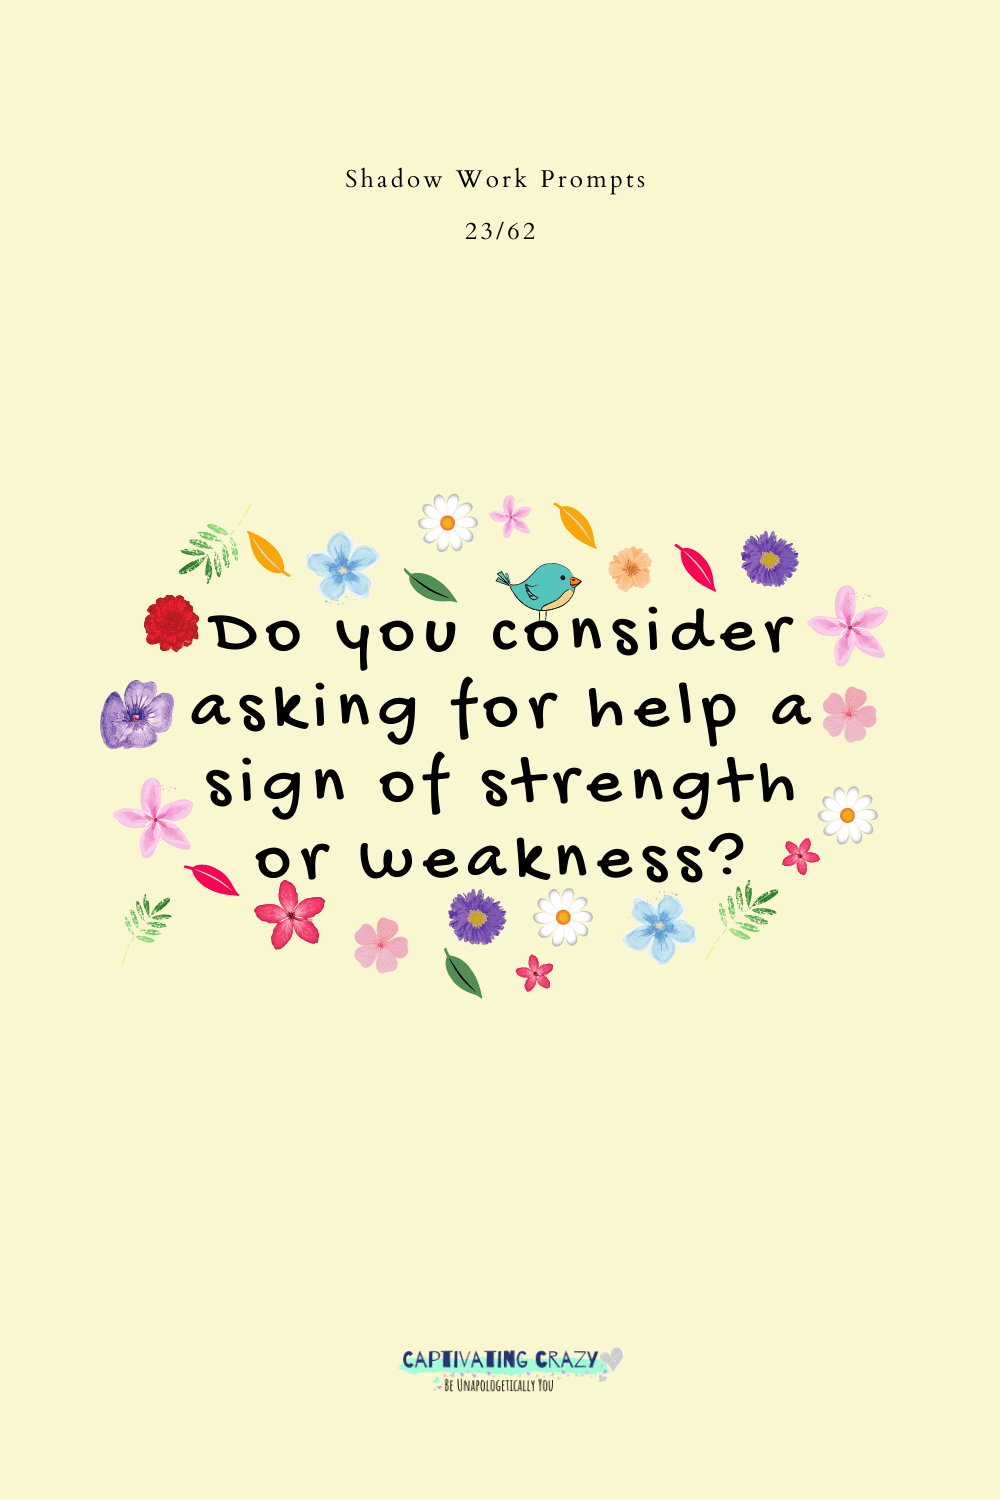 Do you consider asking for help a sign of strength or weakness?